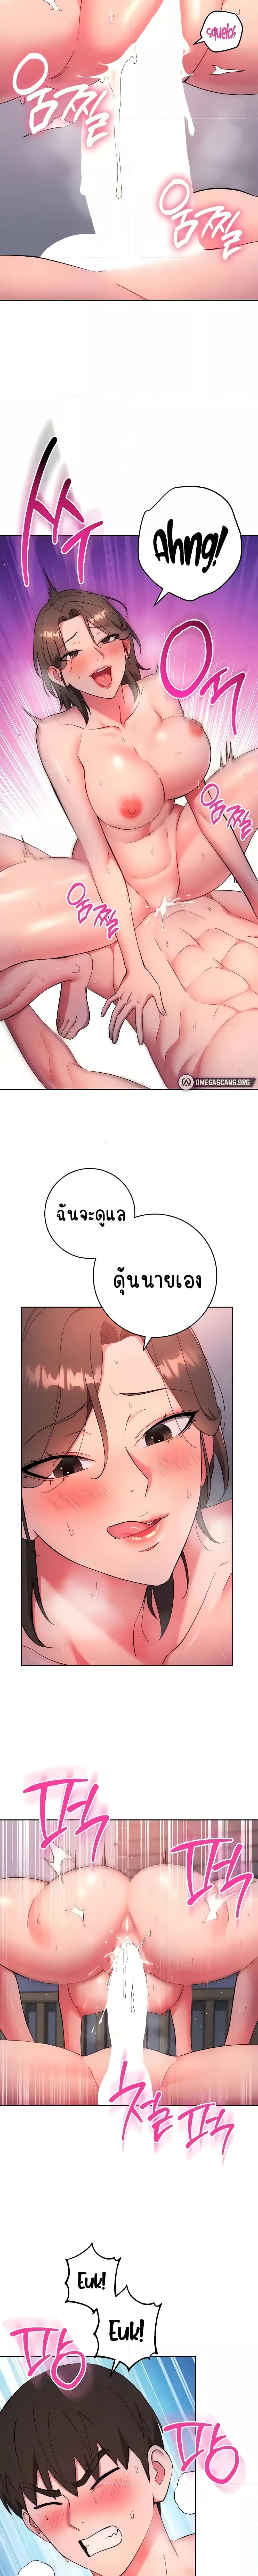 Outsider: The Invisible Man ตอนที่ 8 ภาพ 8